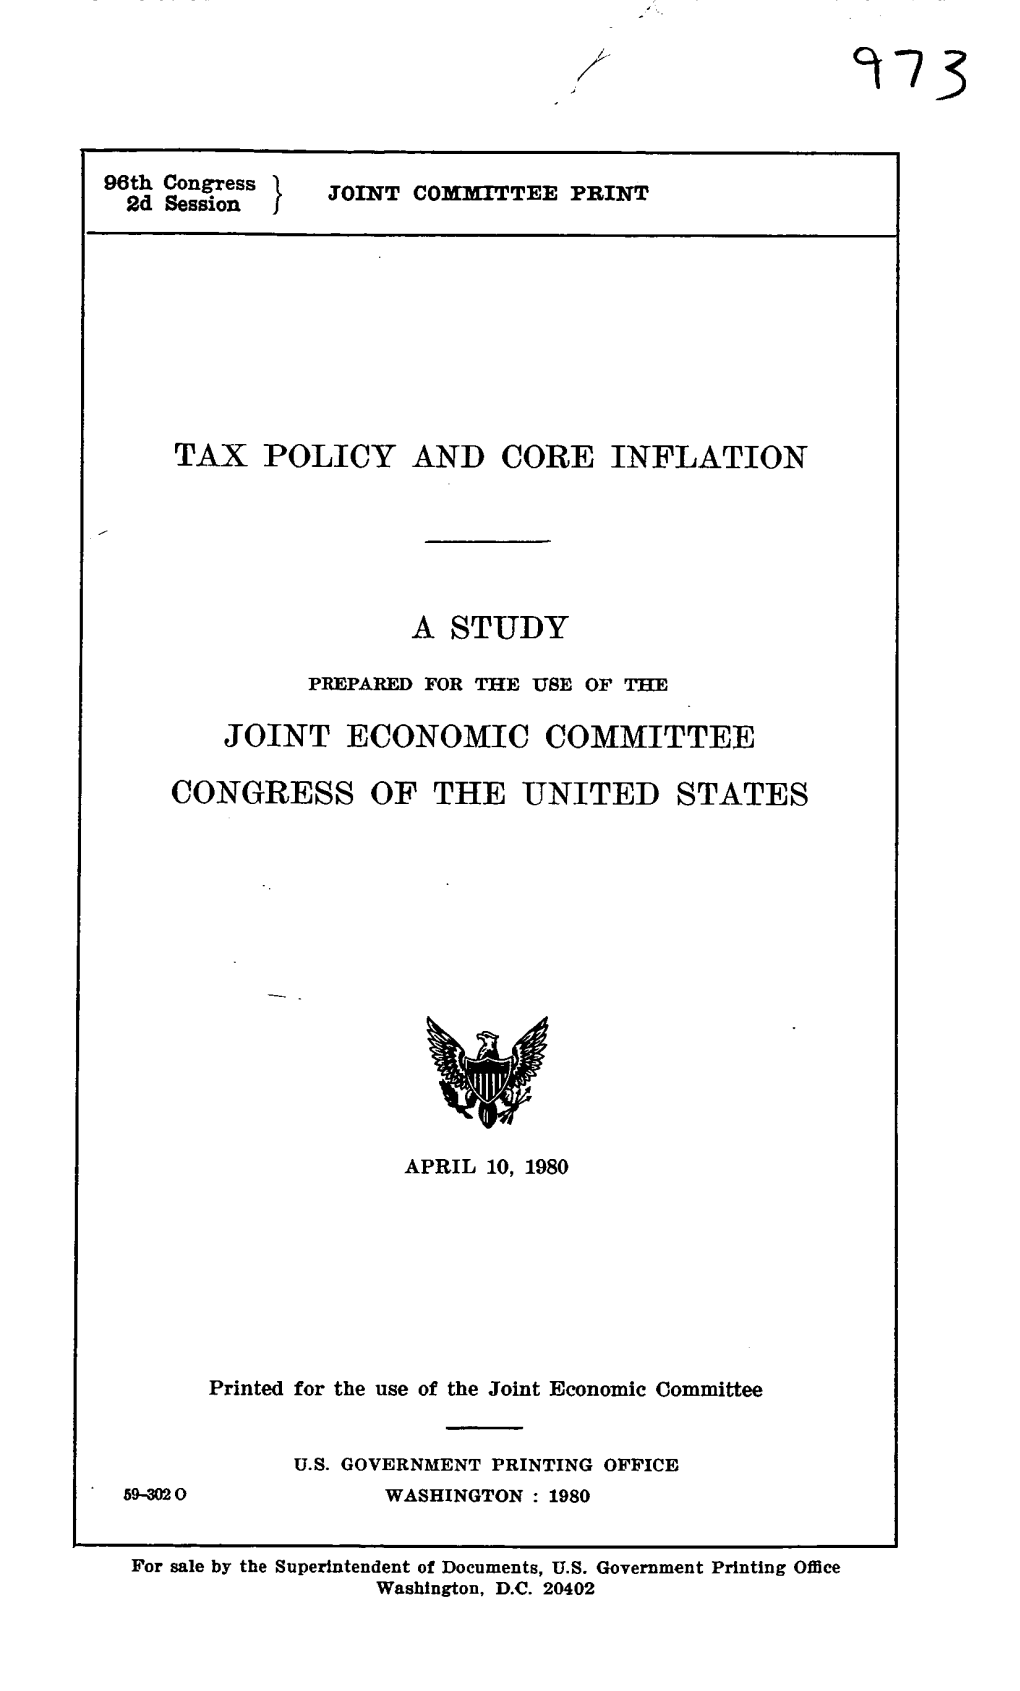 Tax Policy and Core Inflation a Study Joint Economic Committee Congress of the United States